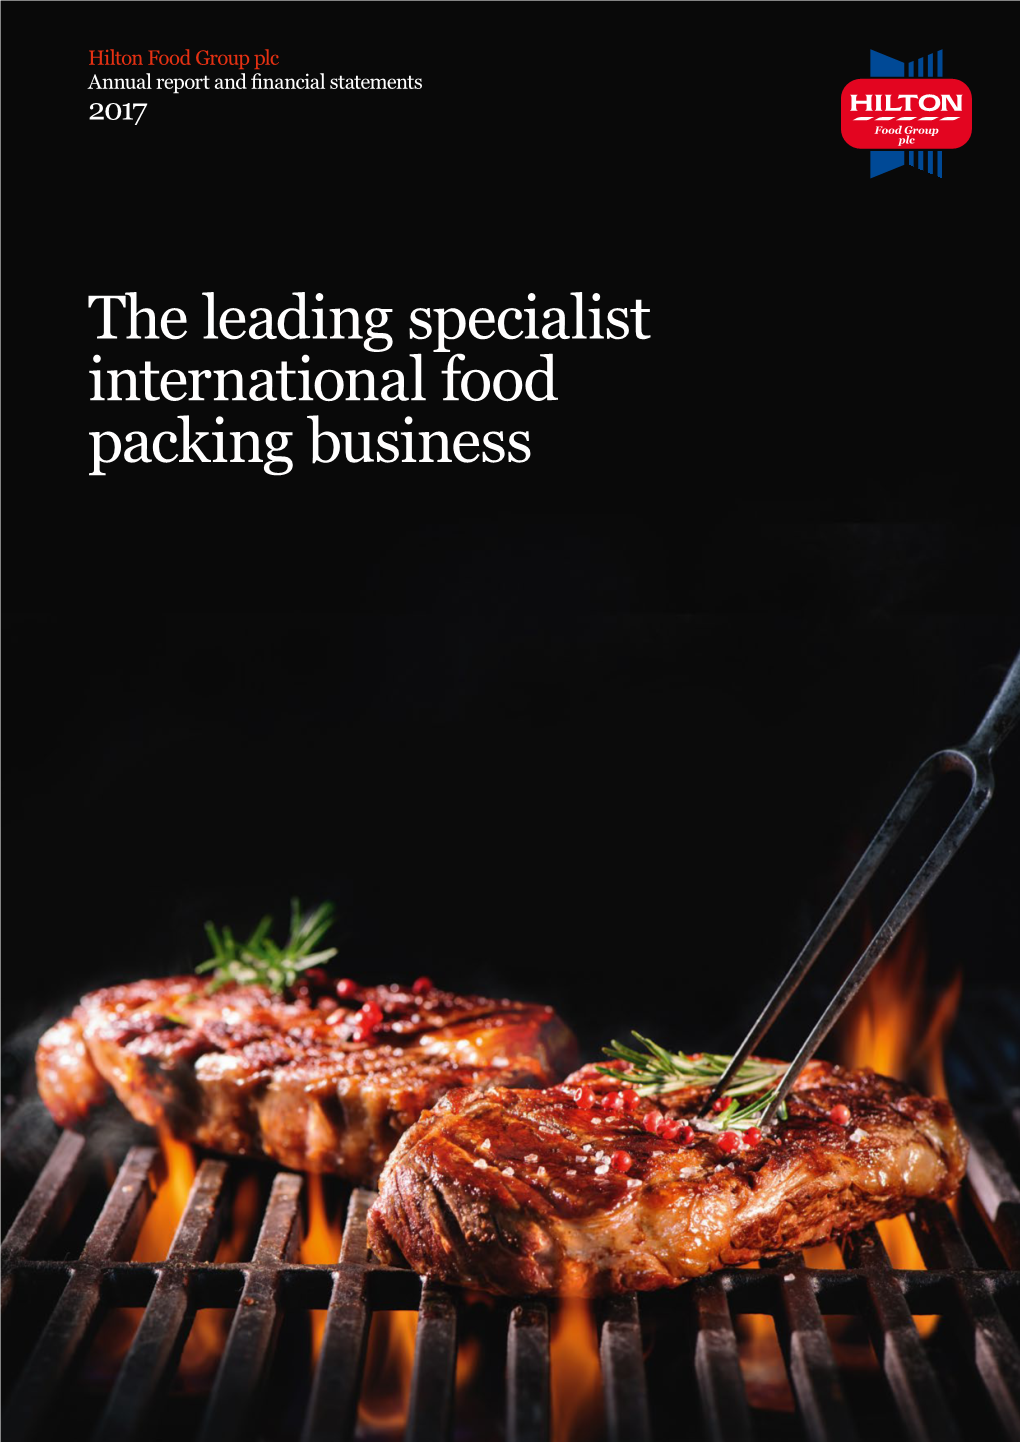 The Leading Specialist International Food Packing Business